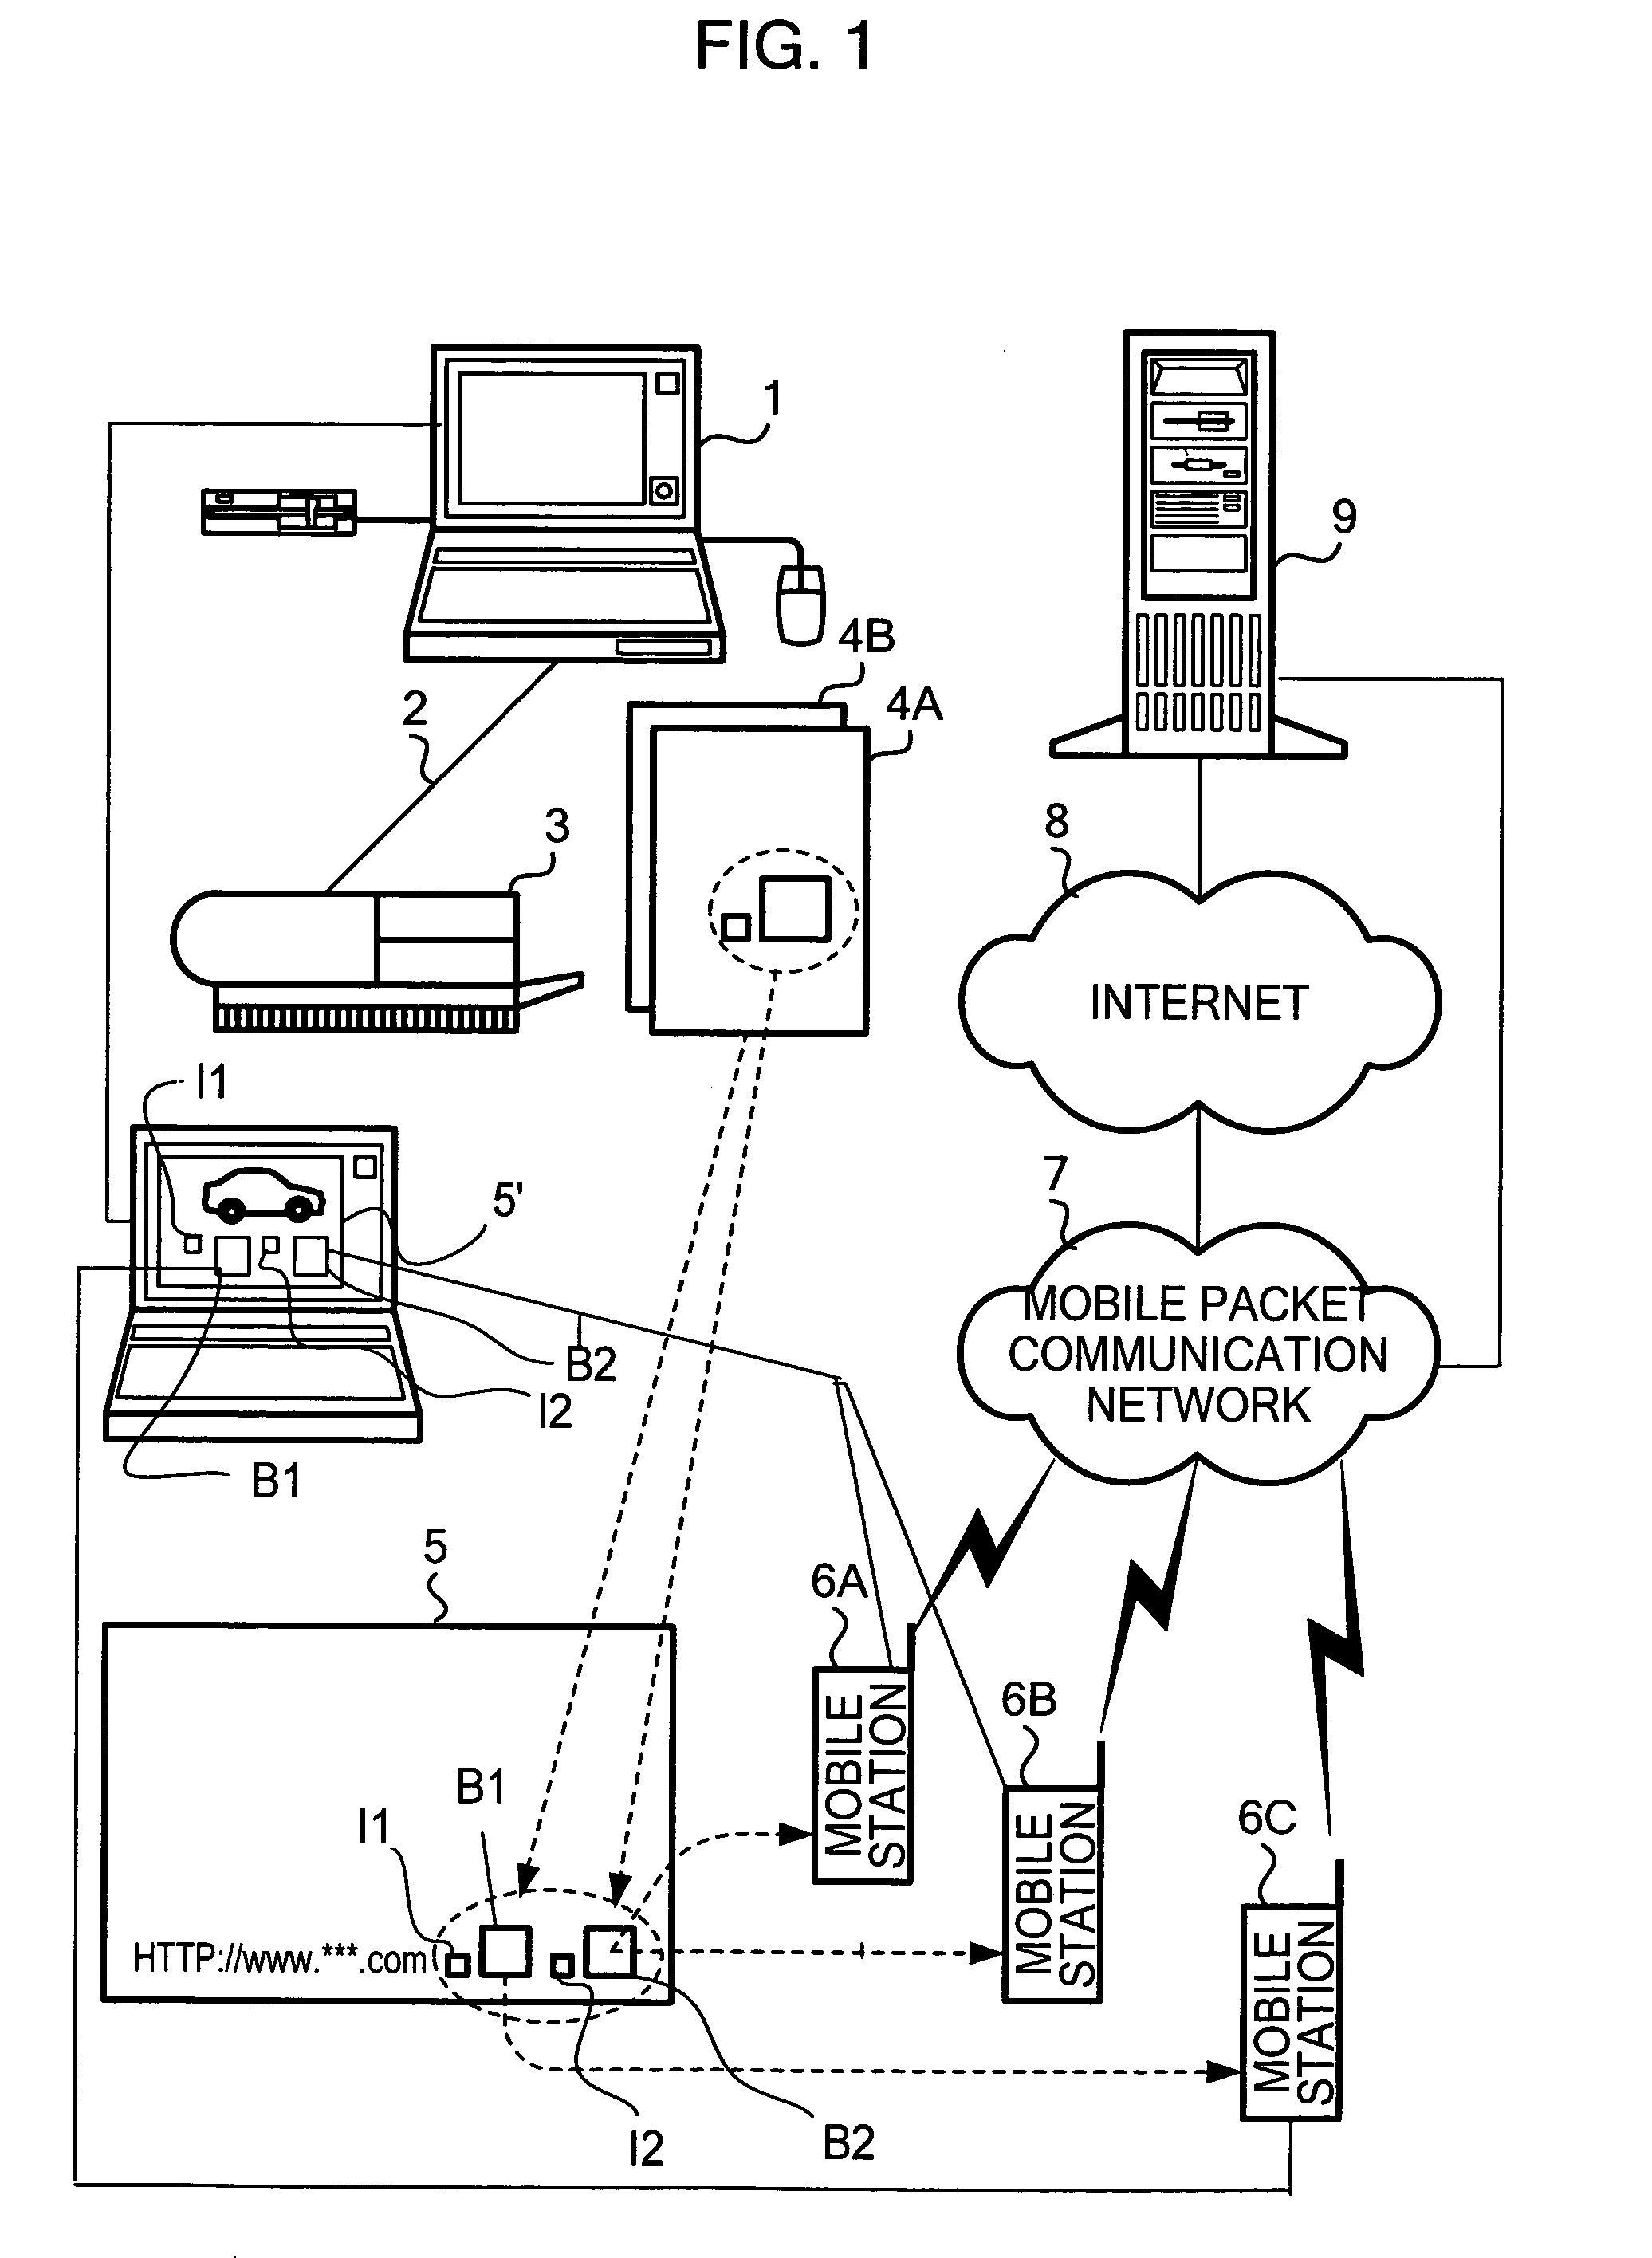 Apparatus and method for reading and decoding information contained in a barcode